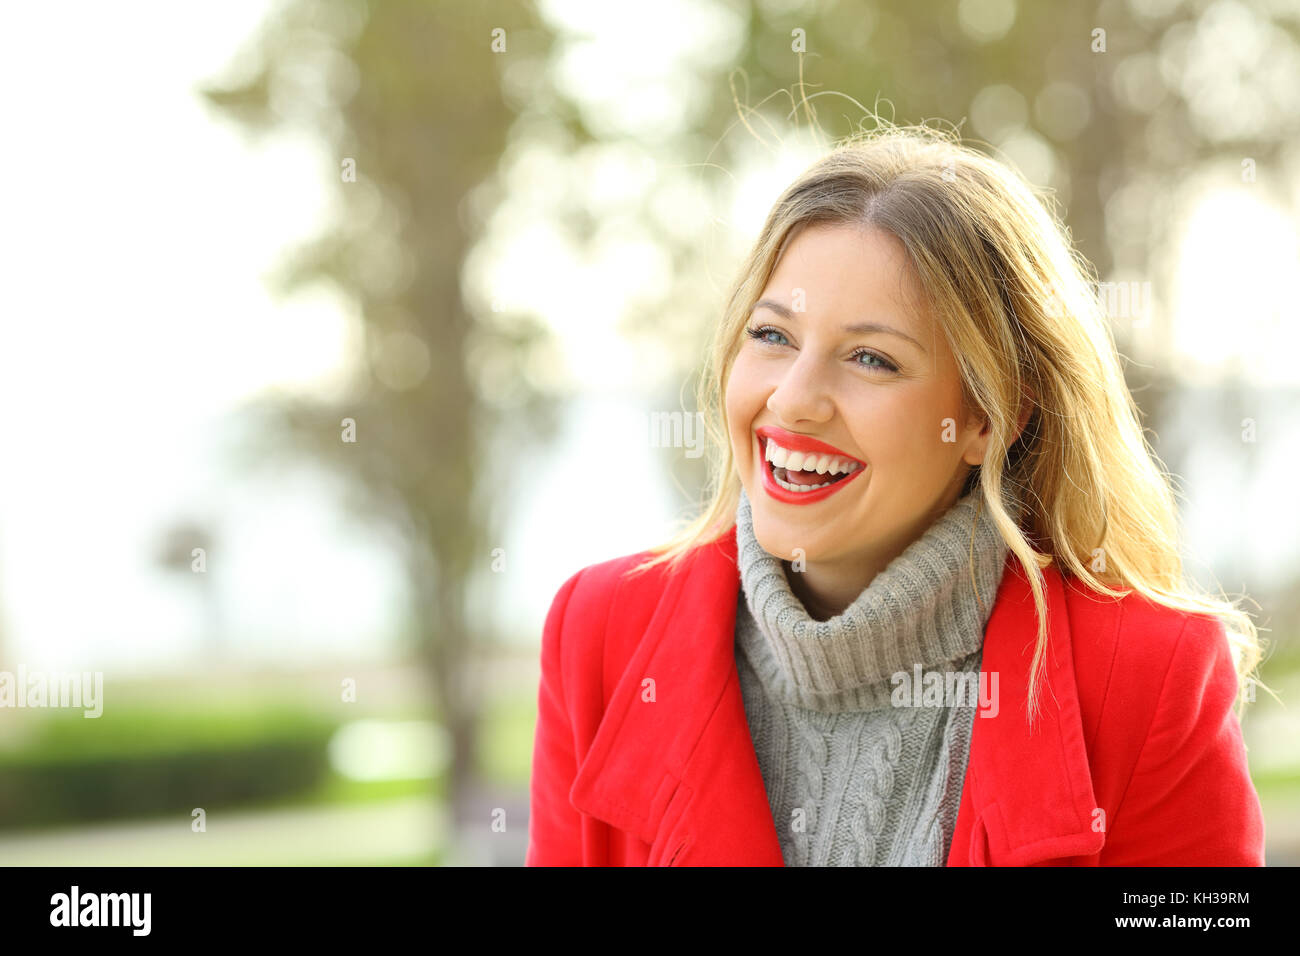 Funny woman wearing a red jacket laughing outside in a park in winter Stock Photo